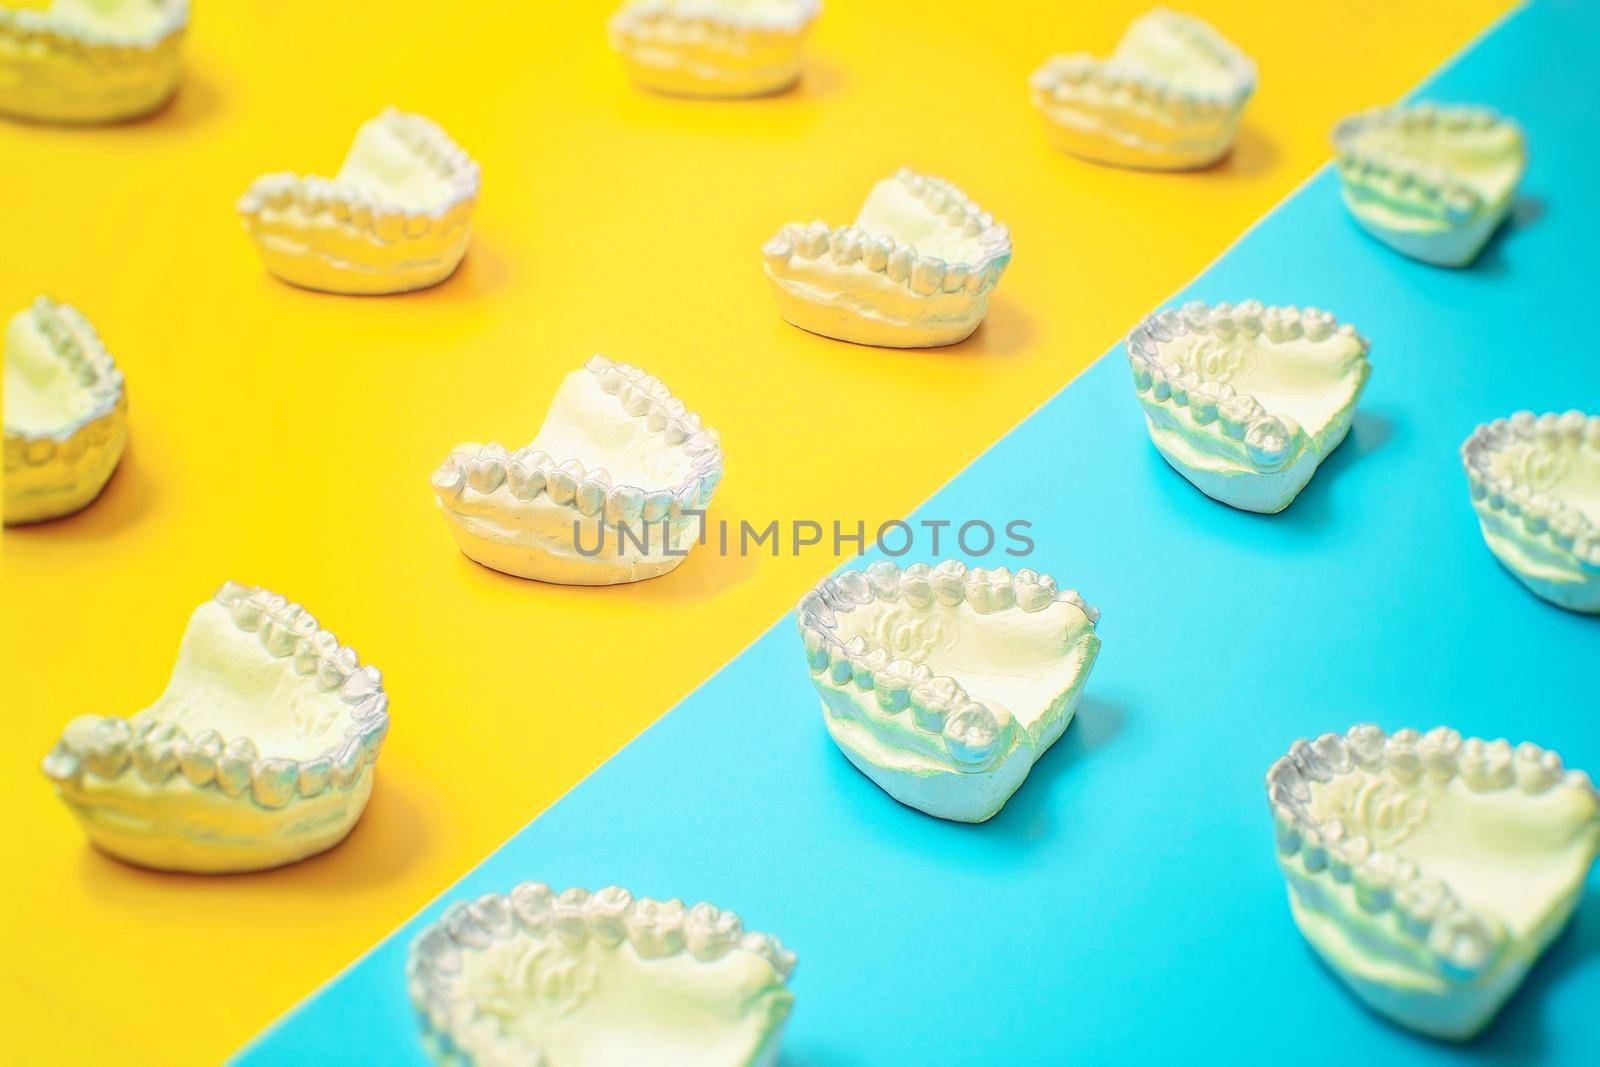 Orthodontic dental theme on blue and yellow background.Transparent invisible dental aligners or braces aplicable for an orthodontic dental treatment